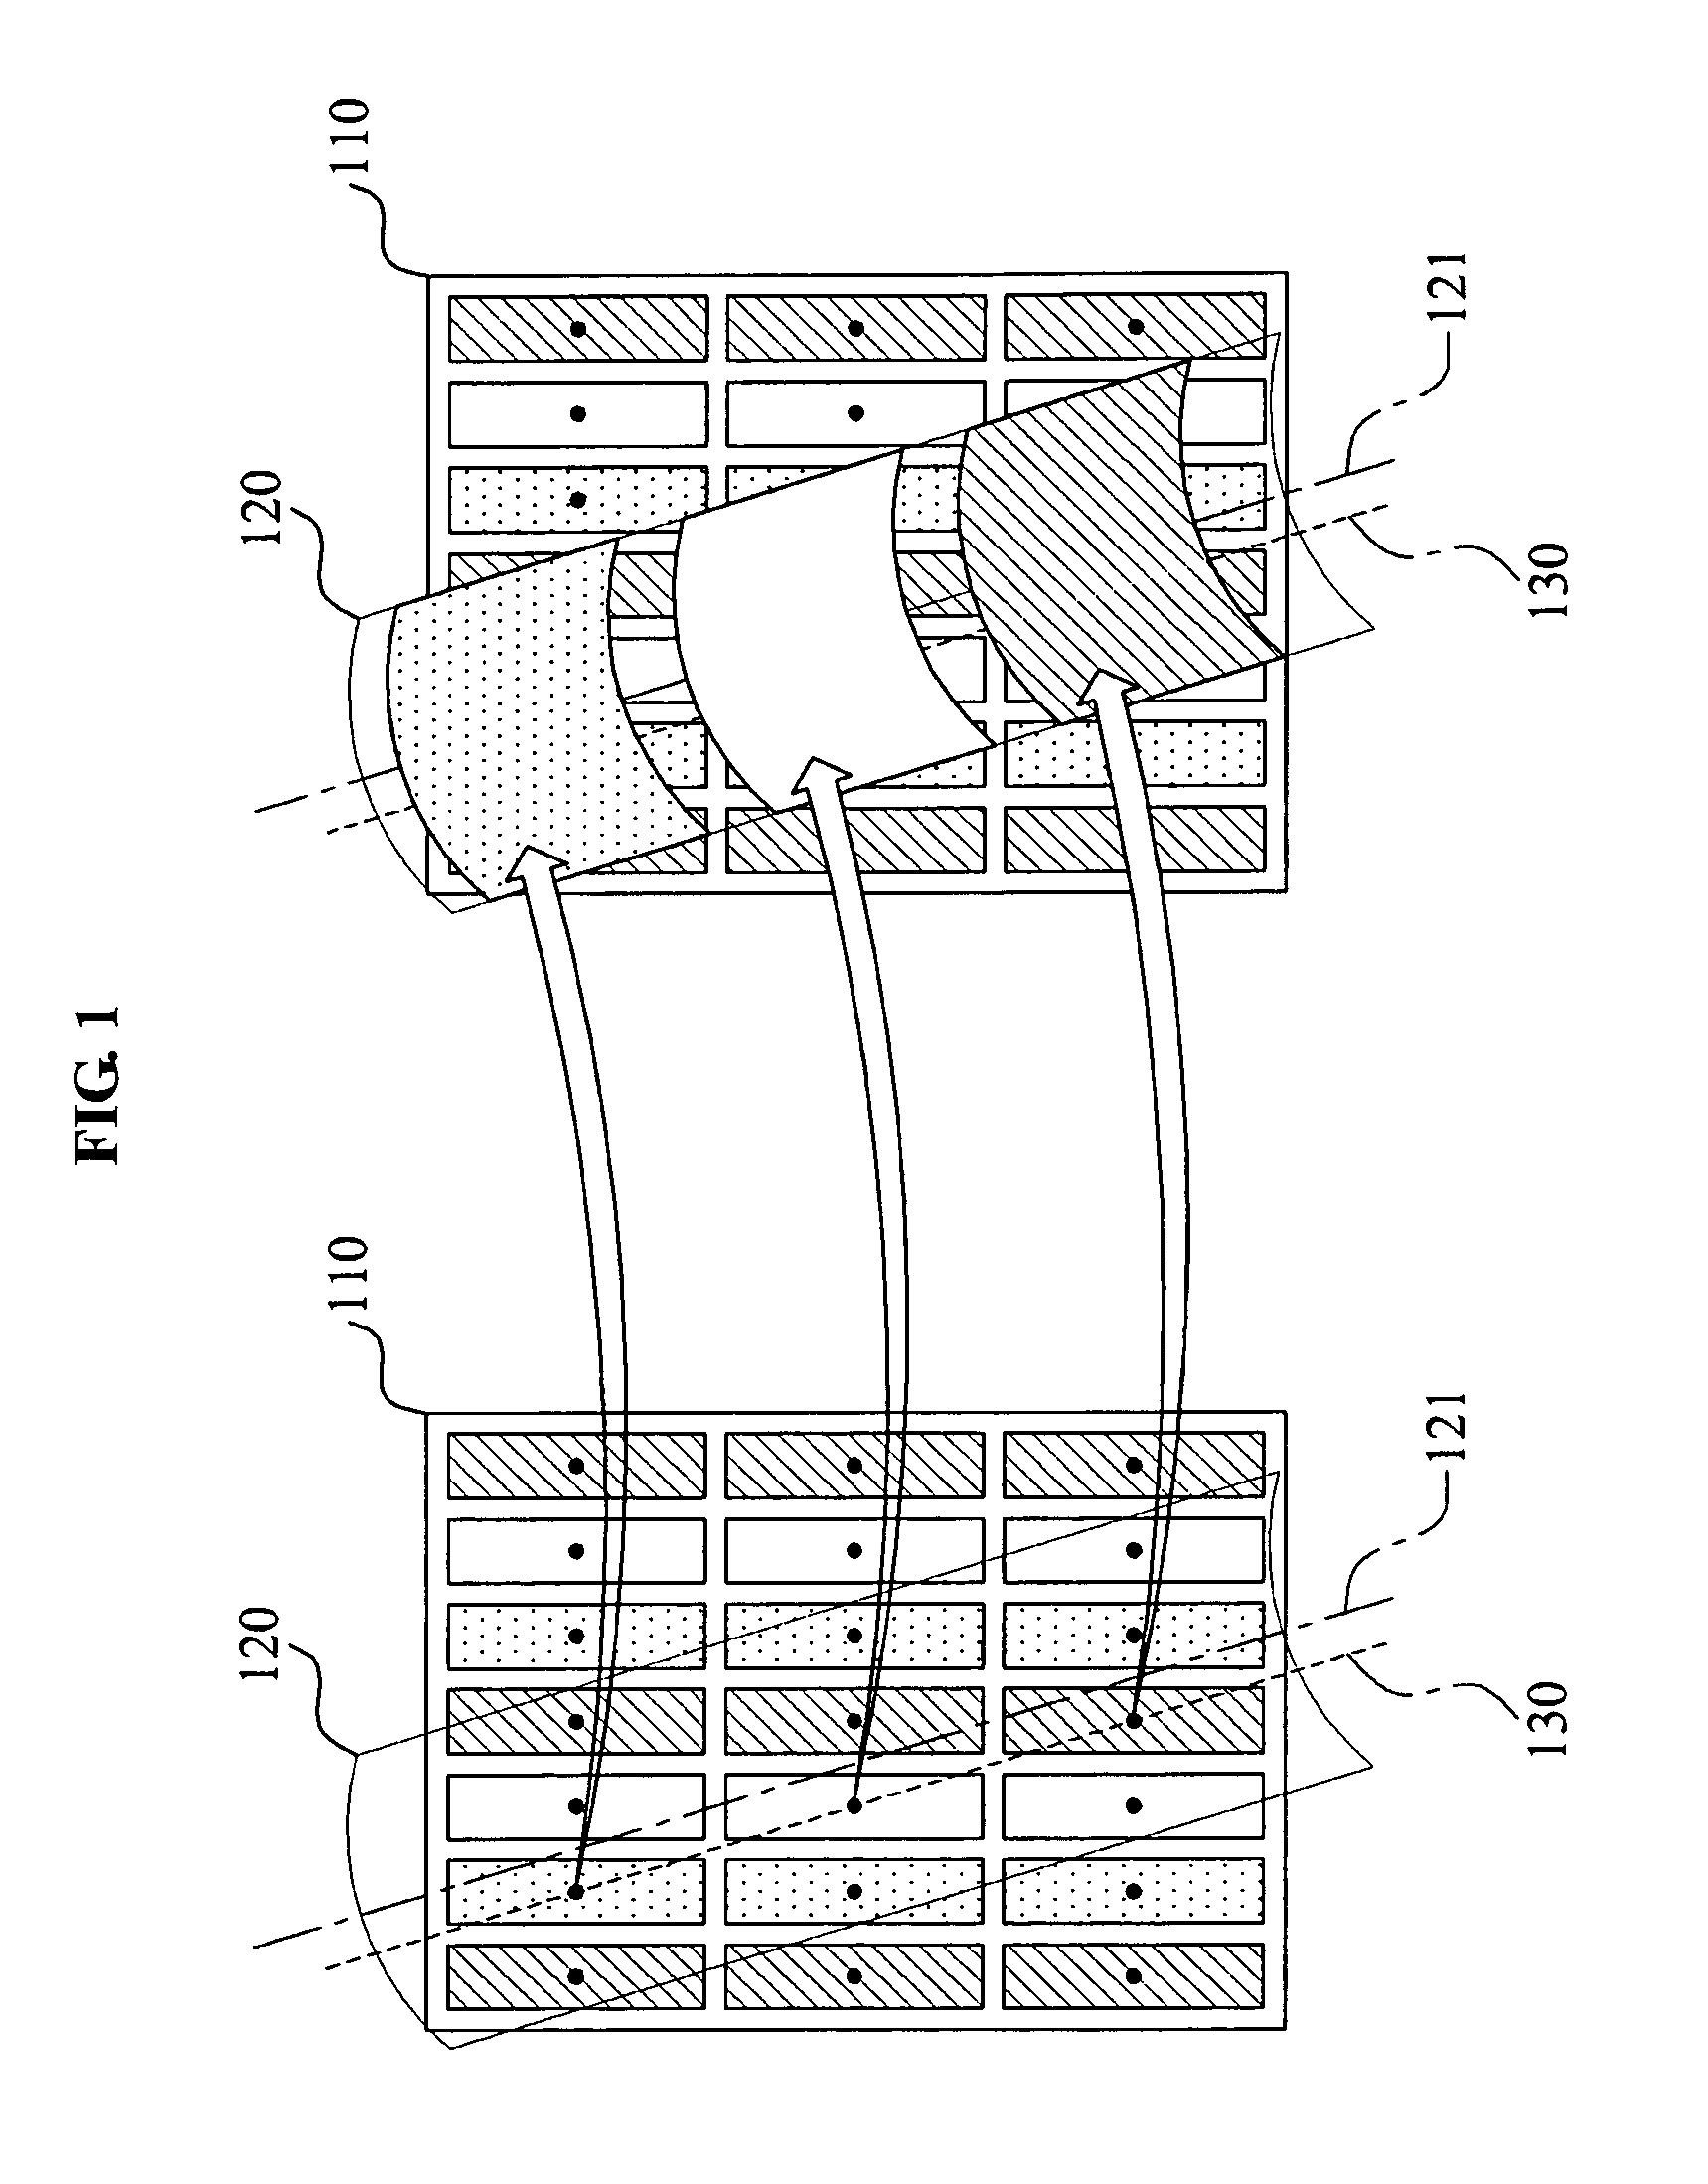 High density multi-view image display system and method with active sub-pixel rendering